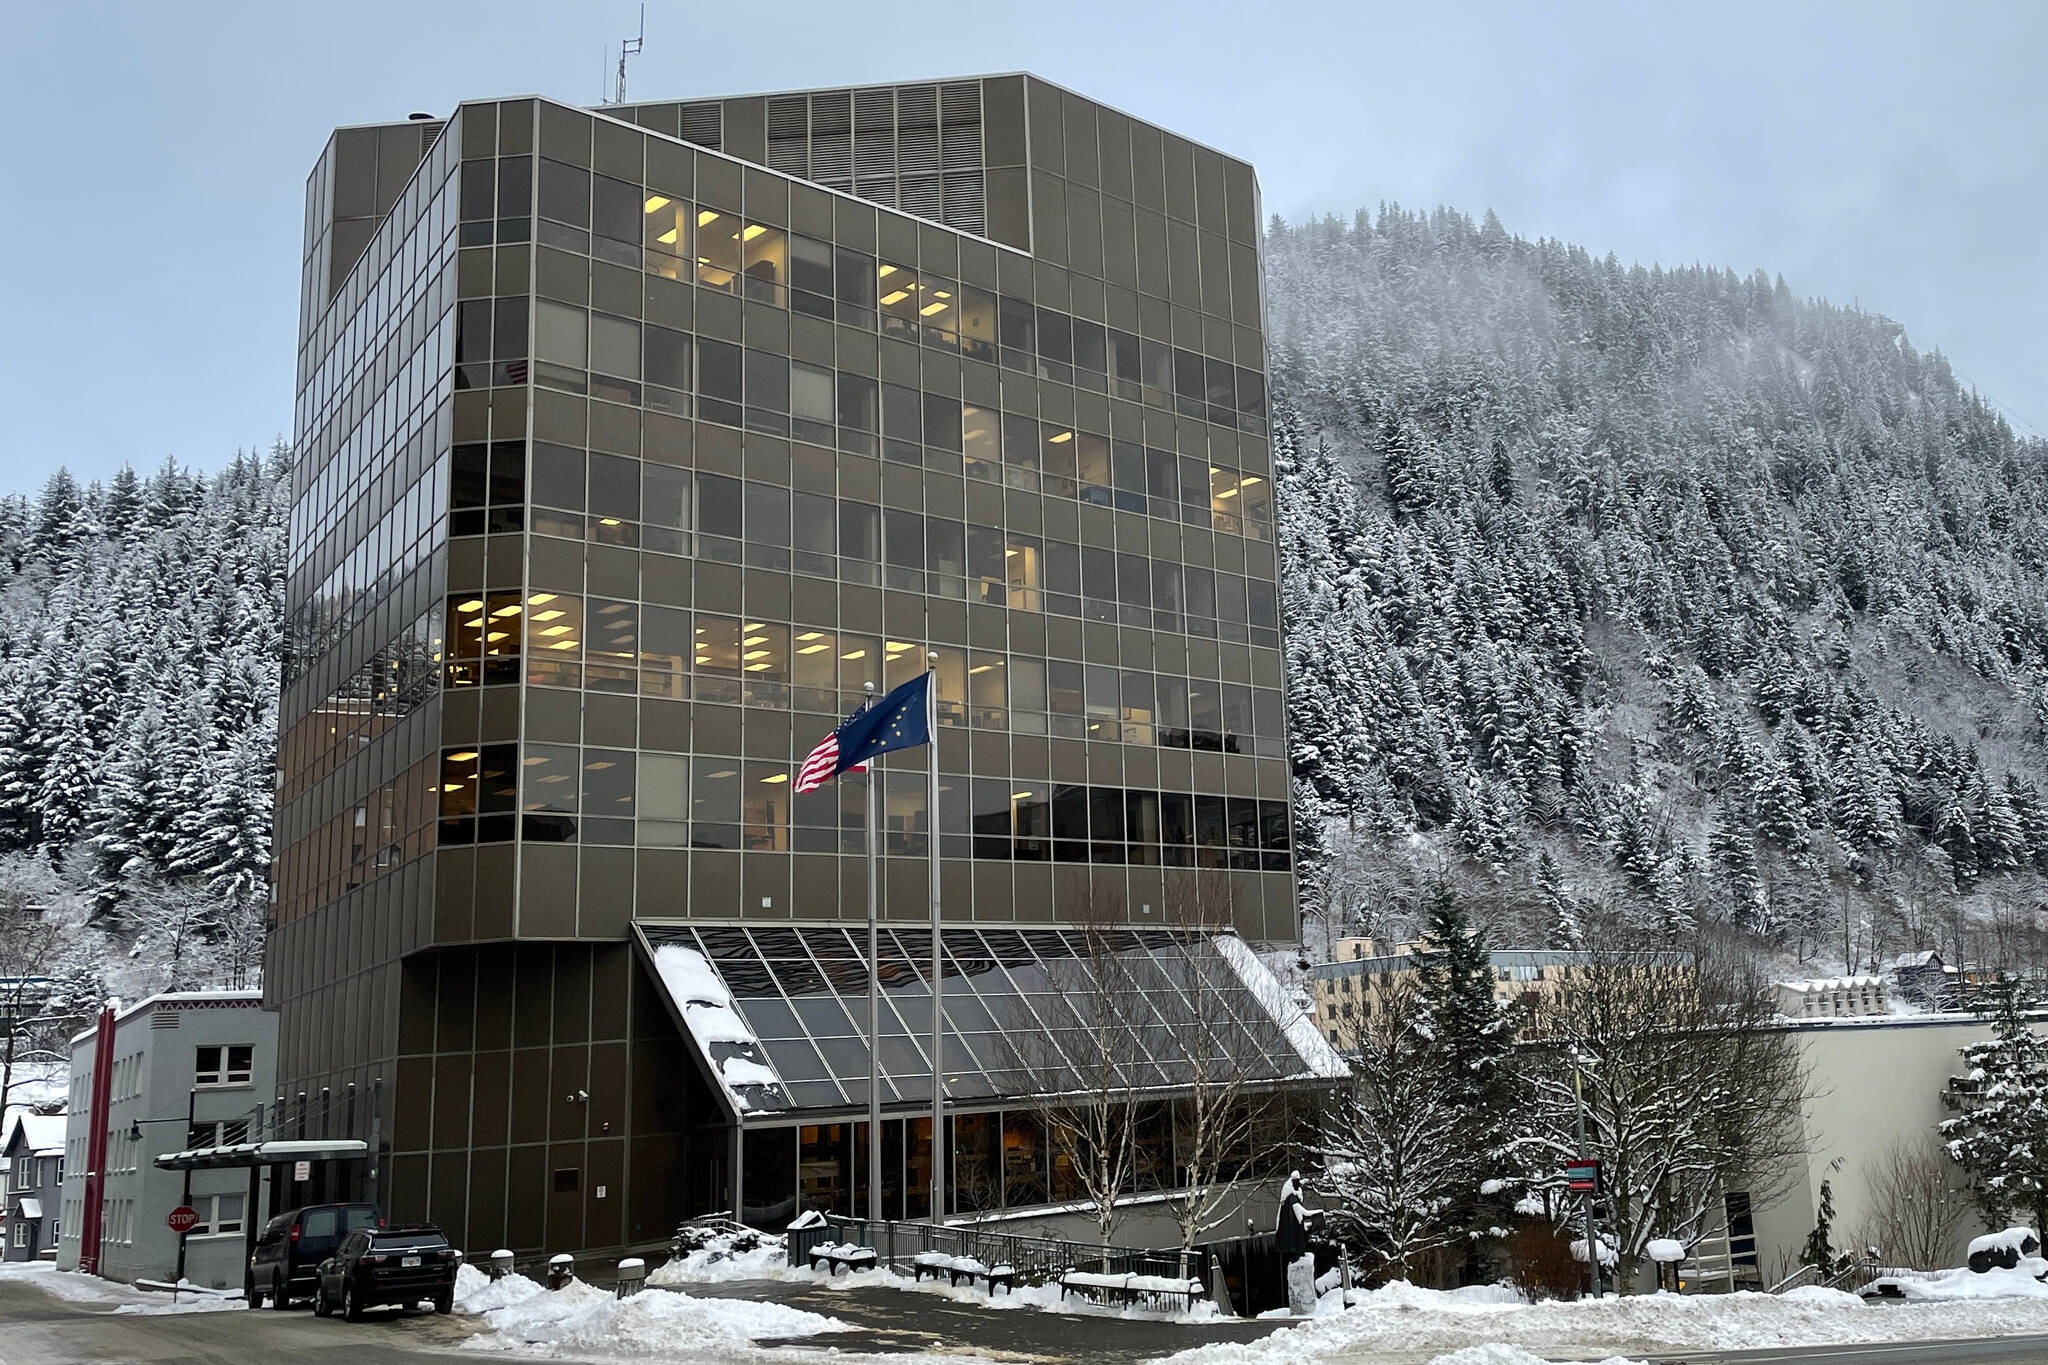 Michael S. Lockett / Juneau Empire file 
The trial for a man accused of a 2018 stabbing death in Yakutat has began in Juneau Superior Court at Dimond Courthouse.